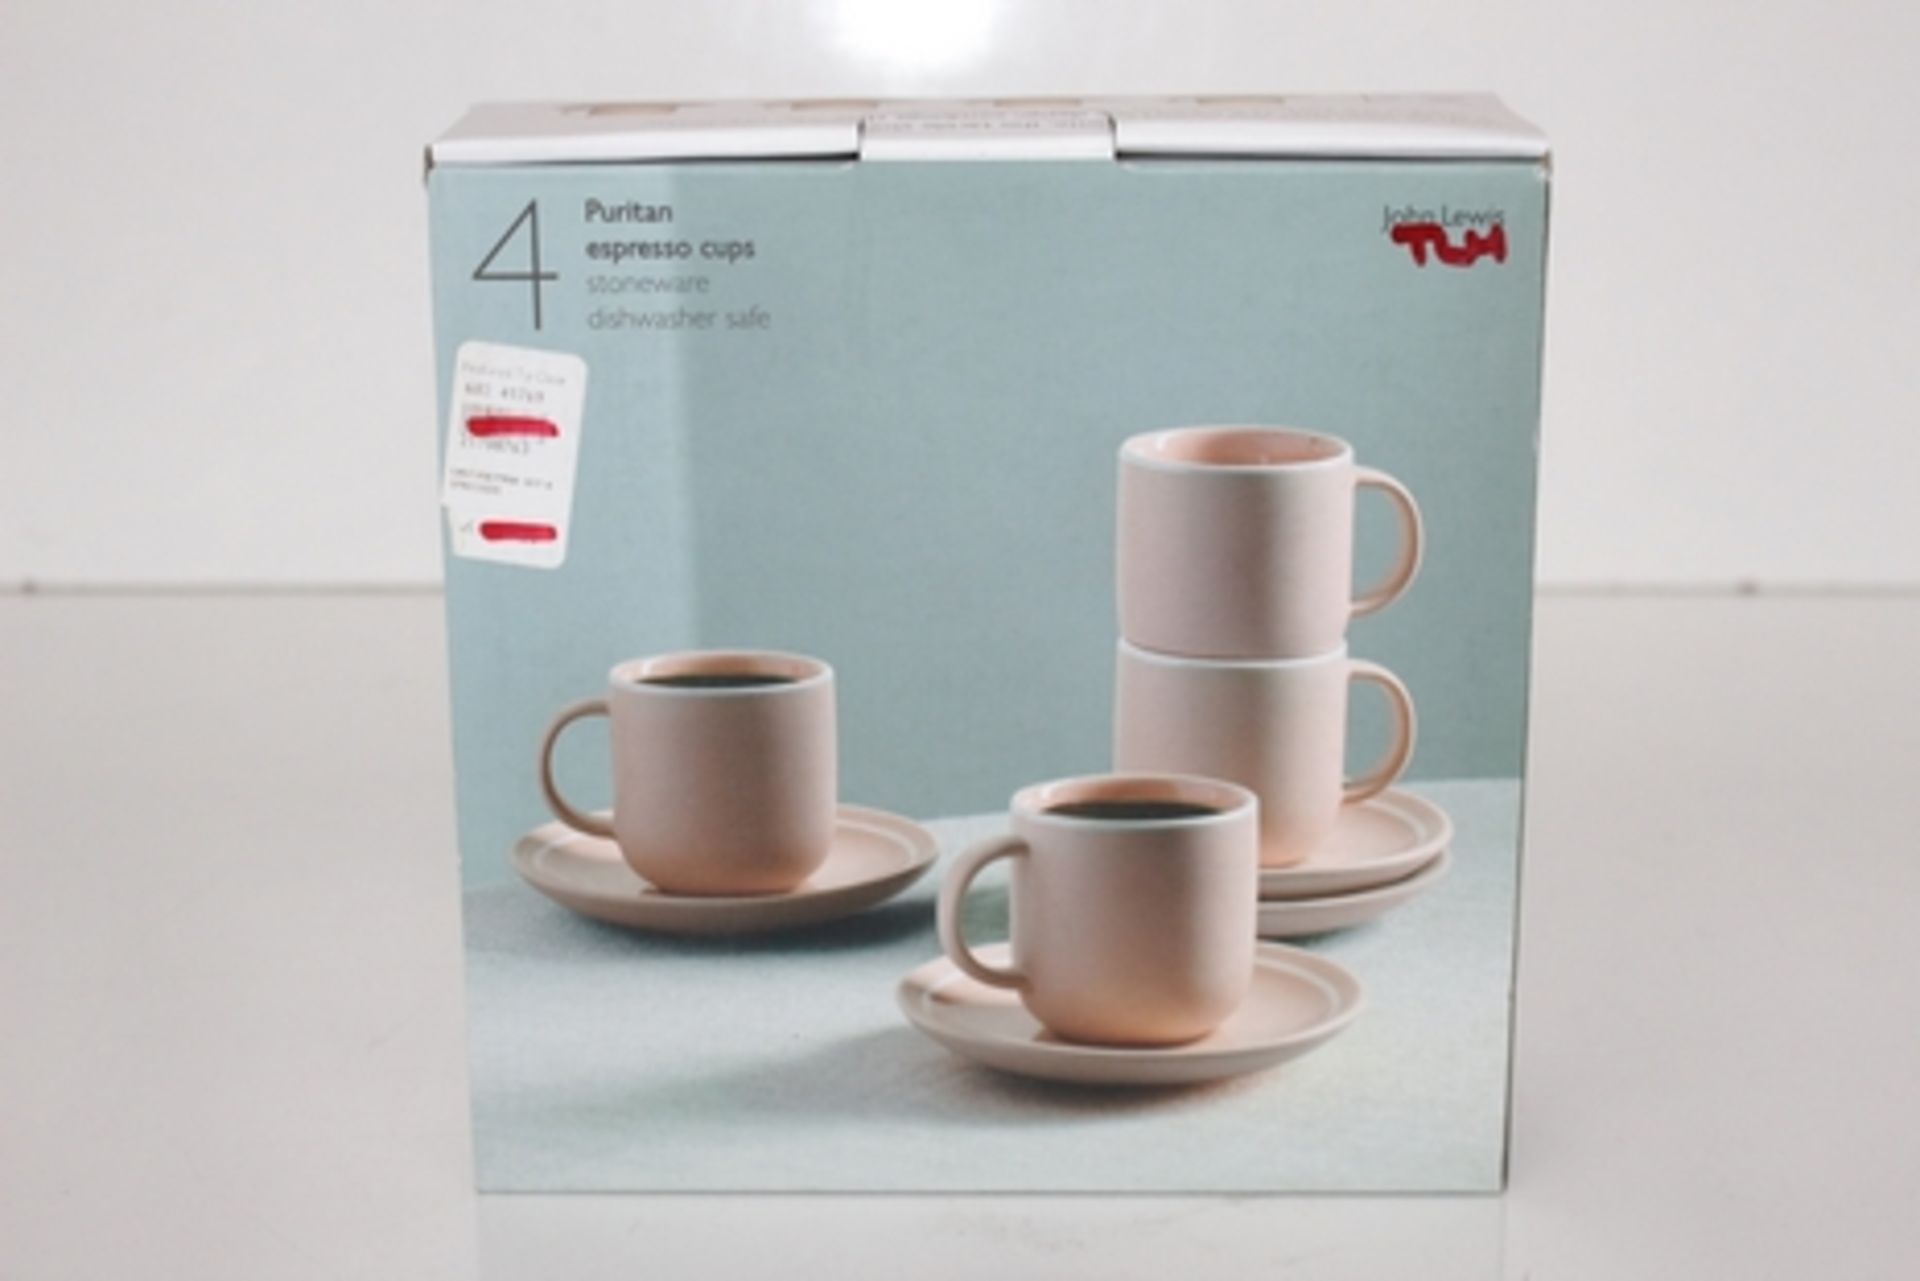 1X LOT TO CONTAIN 6 BOXED BOXES OF ESPRESSO CUPS COMBINED RRP £140 (DS-TLH-H) (8.086)